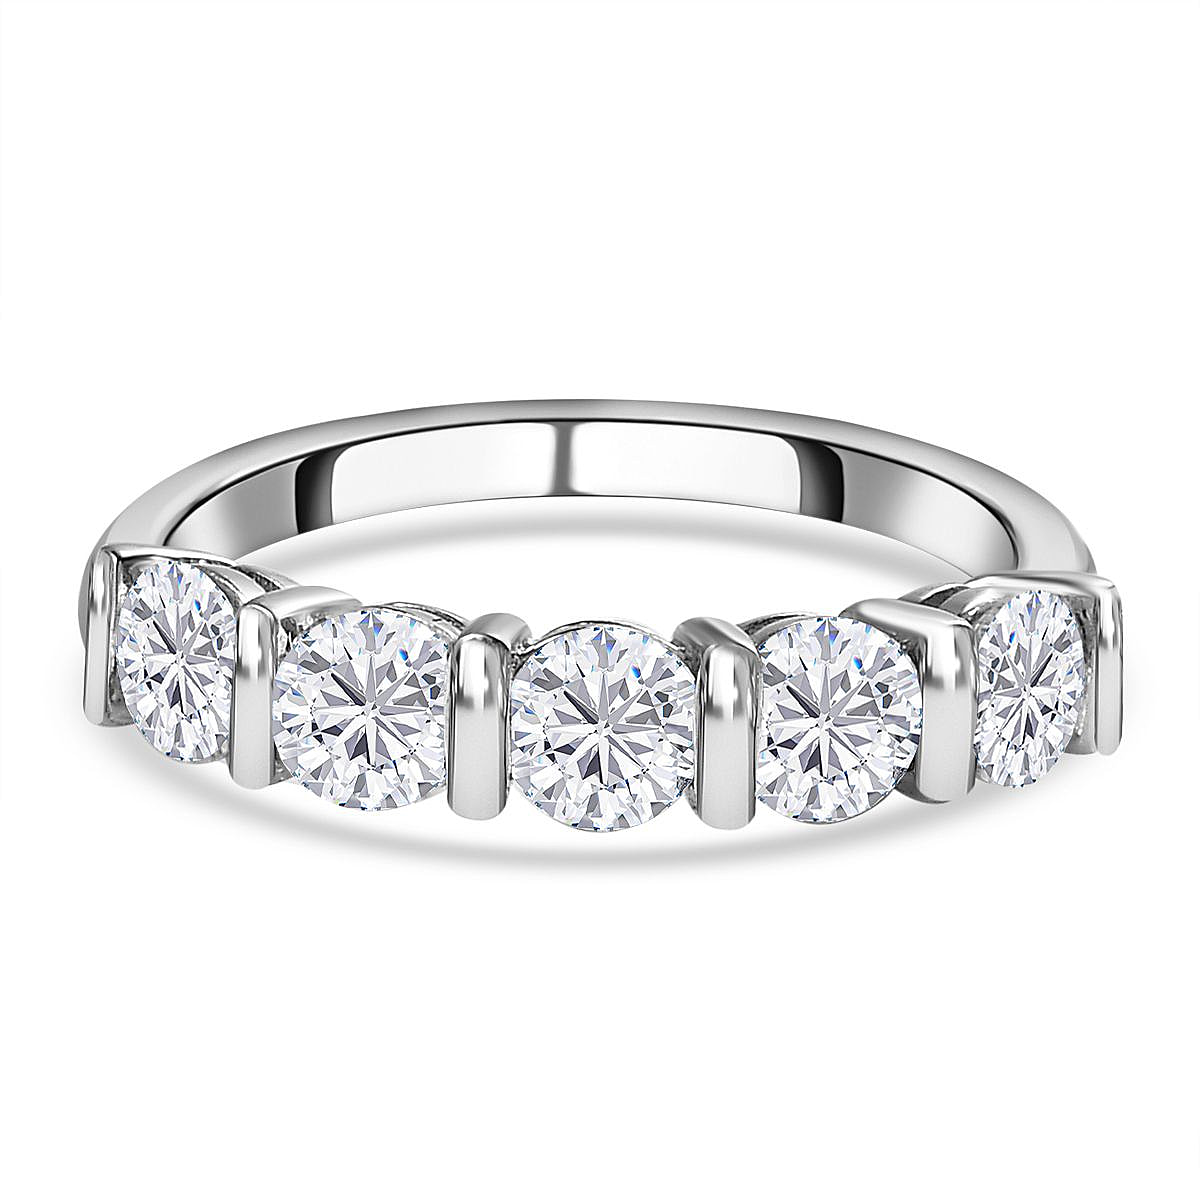 Moissanite 5 Stone Ring in Platinum Overlay Sterling Silver 1.14 Ct.